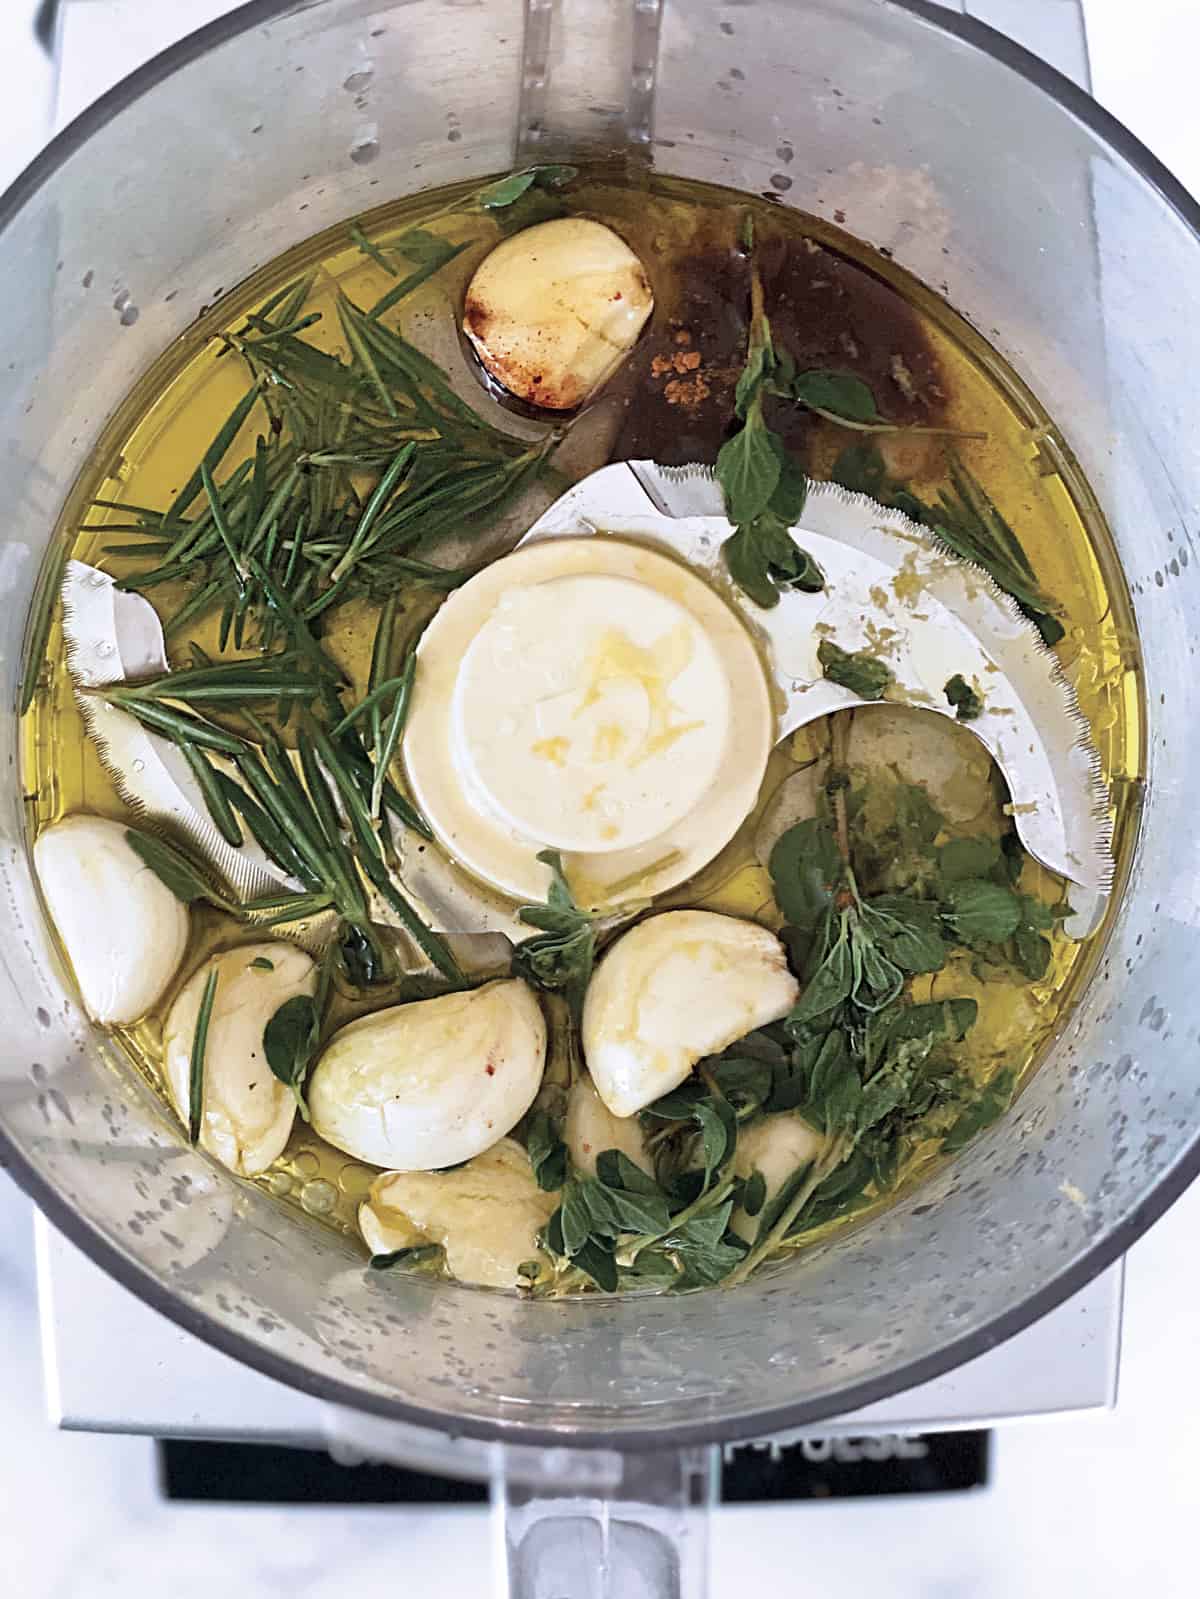 Garlic and herbs in a food processor with olive oil.